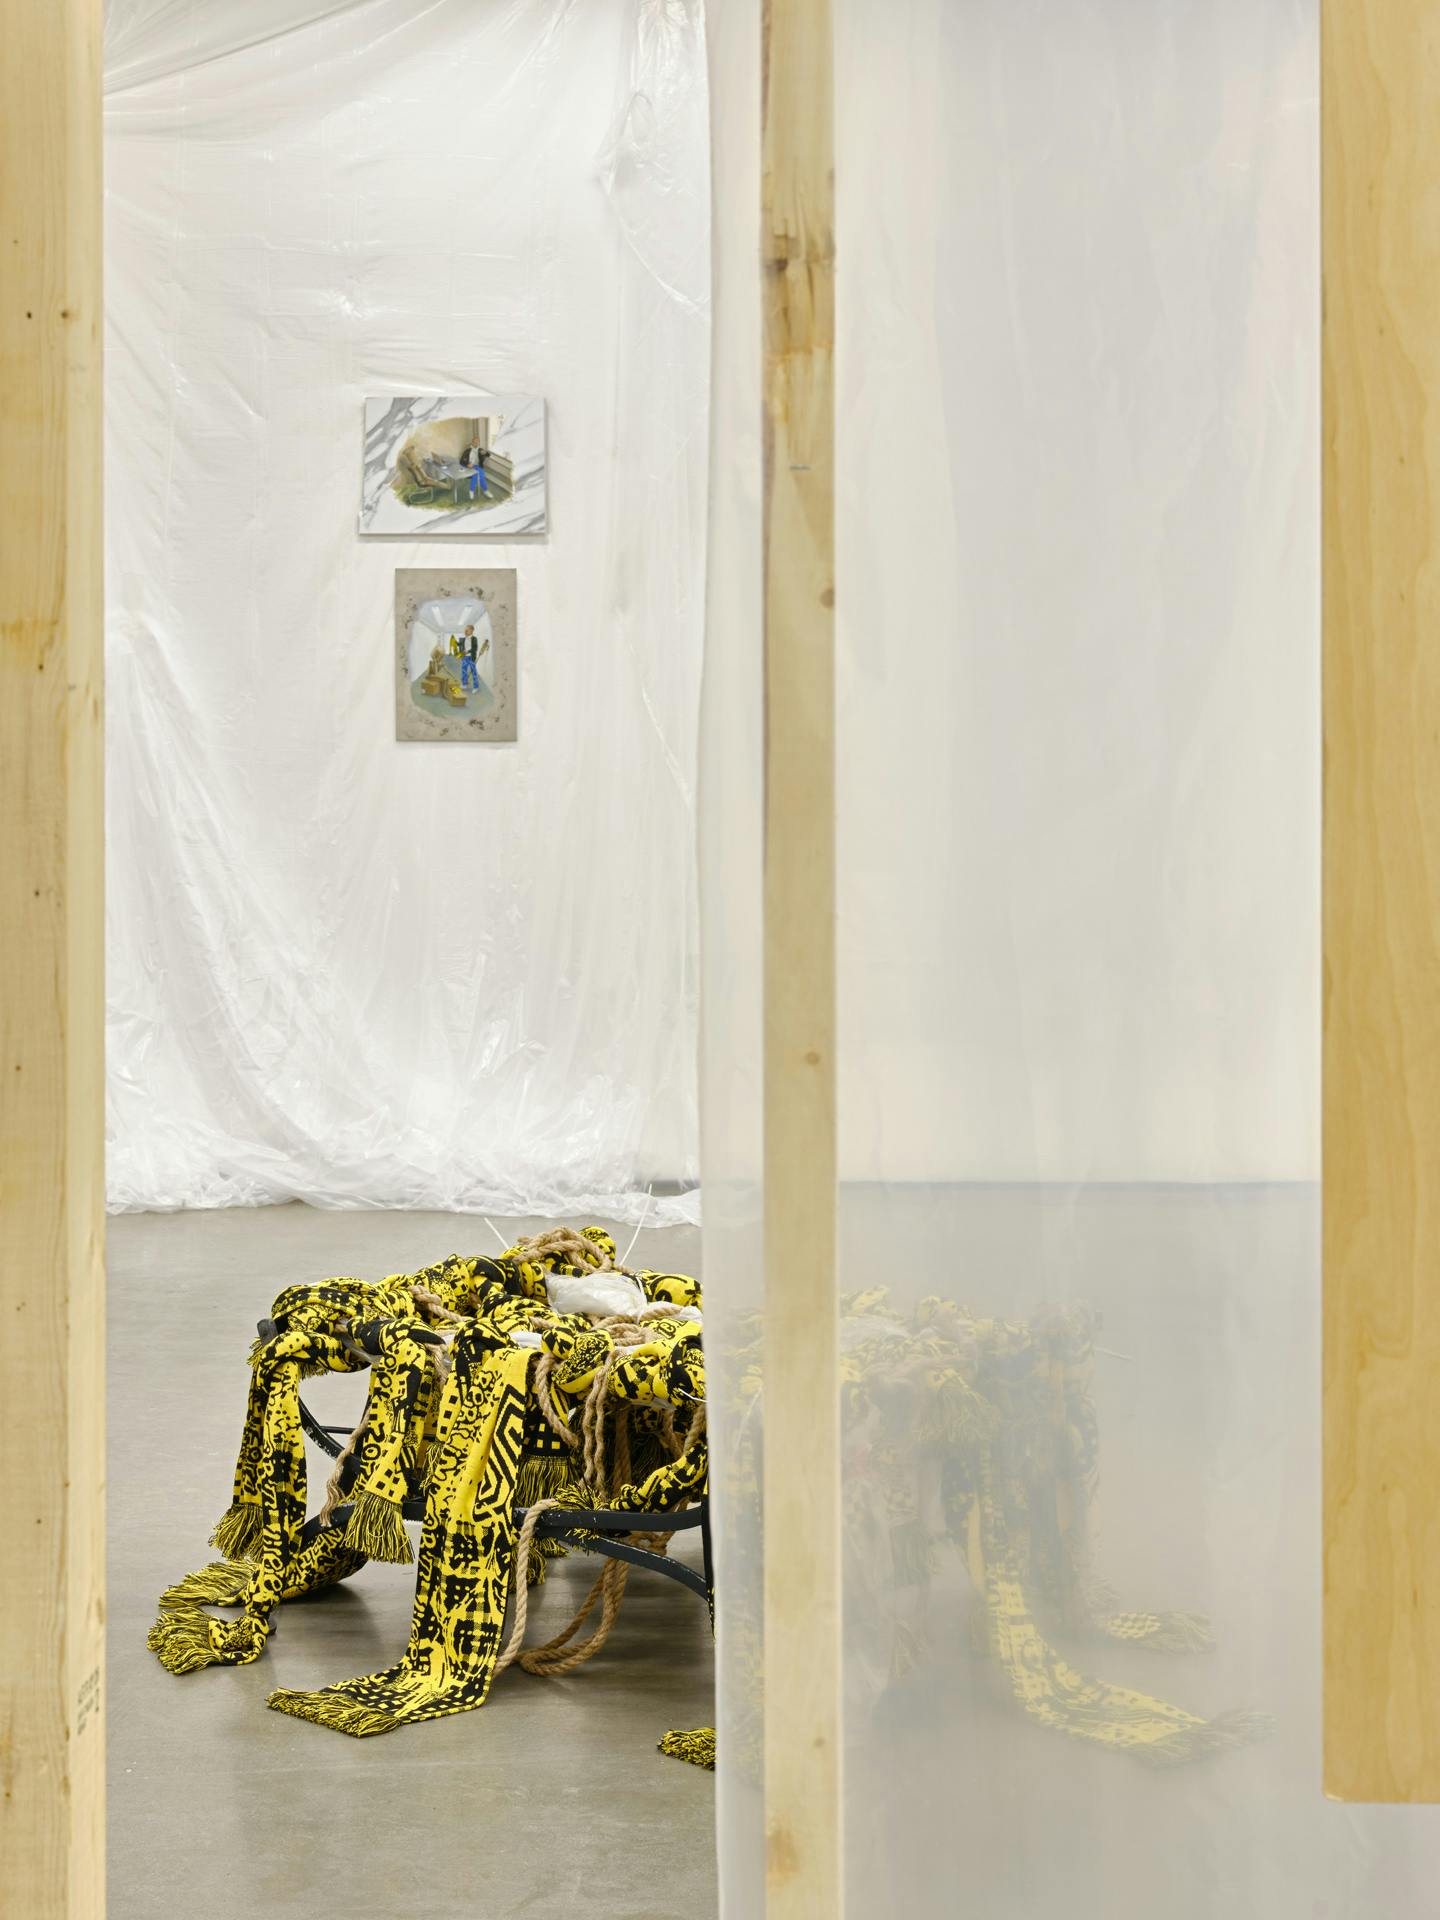 A view through an unfinished wooden wall structure of two small paintings hanging on a gallery wall draped with translucent plastic sheets and a sculpture sitting on the floor made with yellow textiles. 